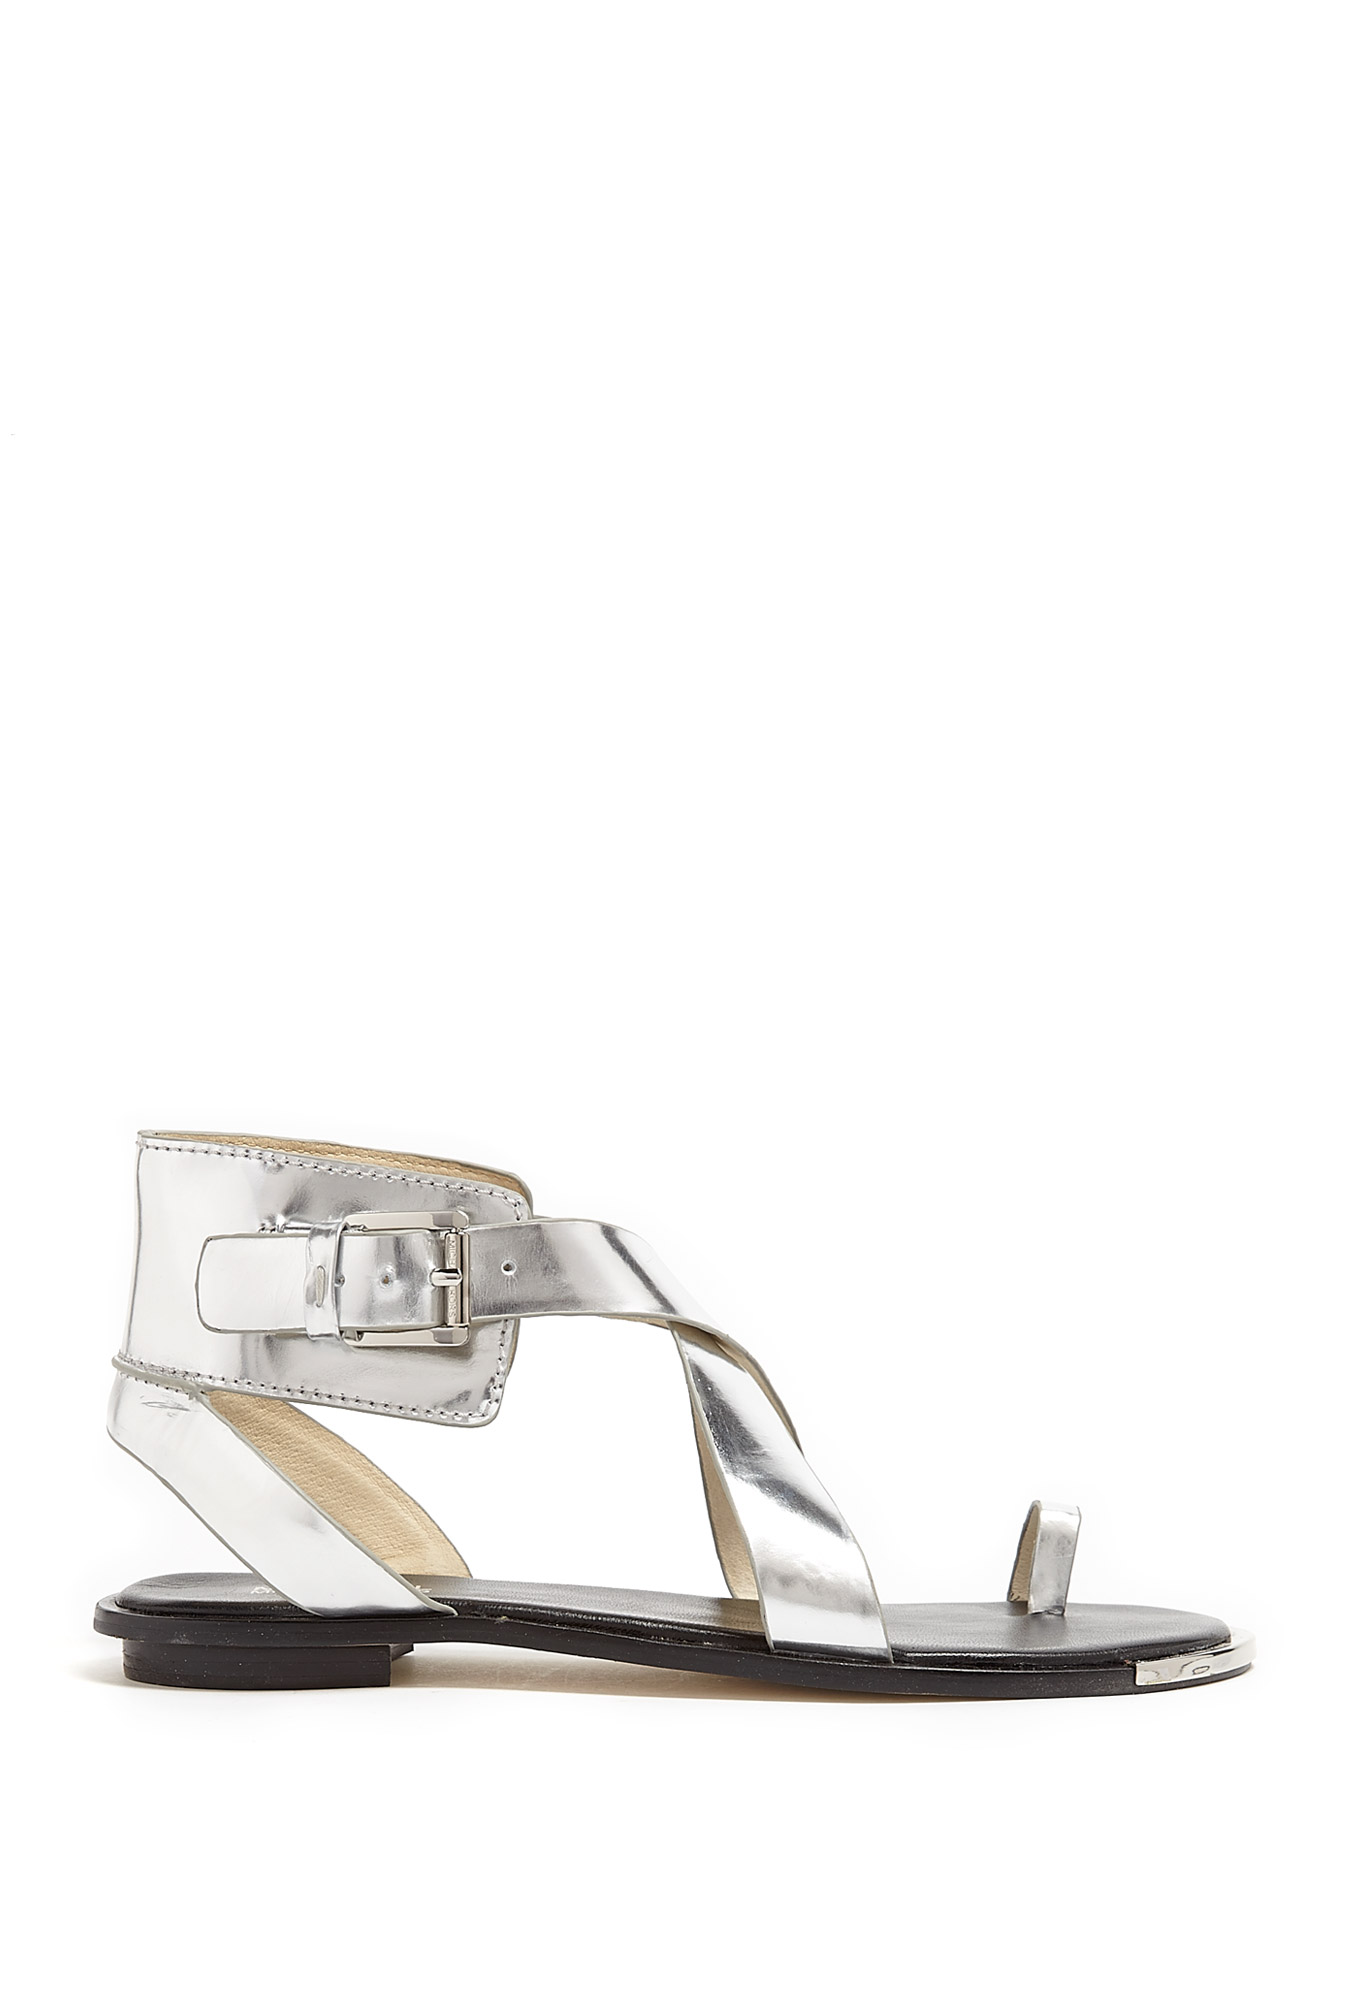 Michael Michael Kors Silver Clader Gladiator Sandals in Silver | Lyst